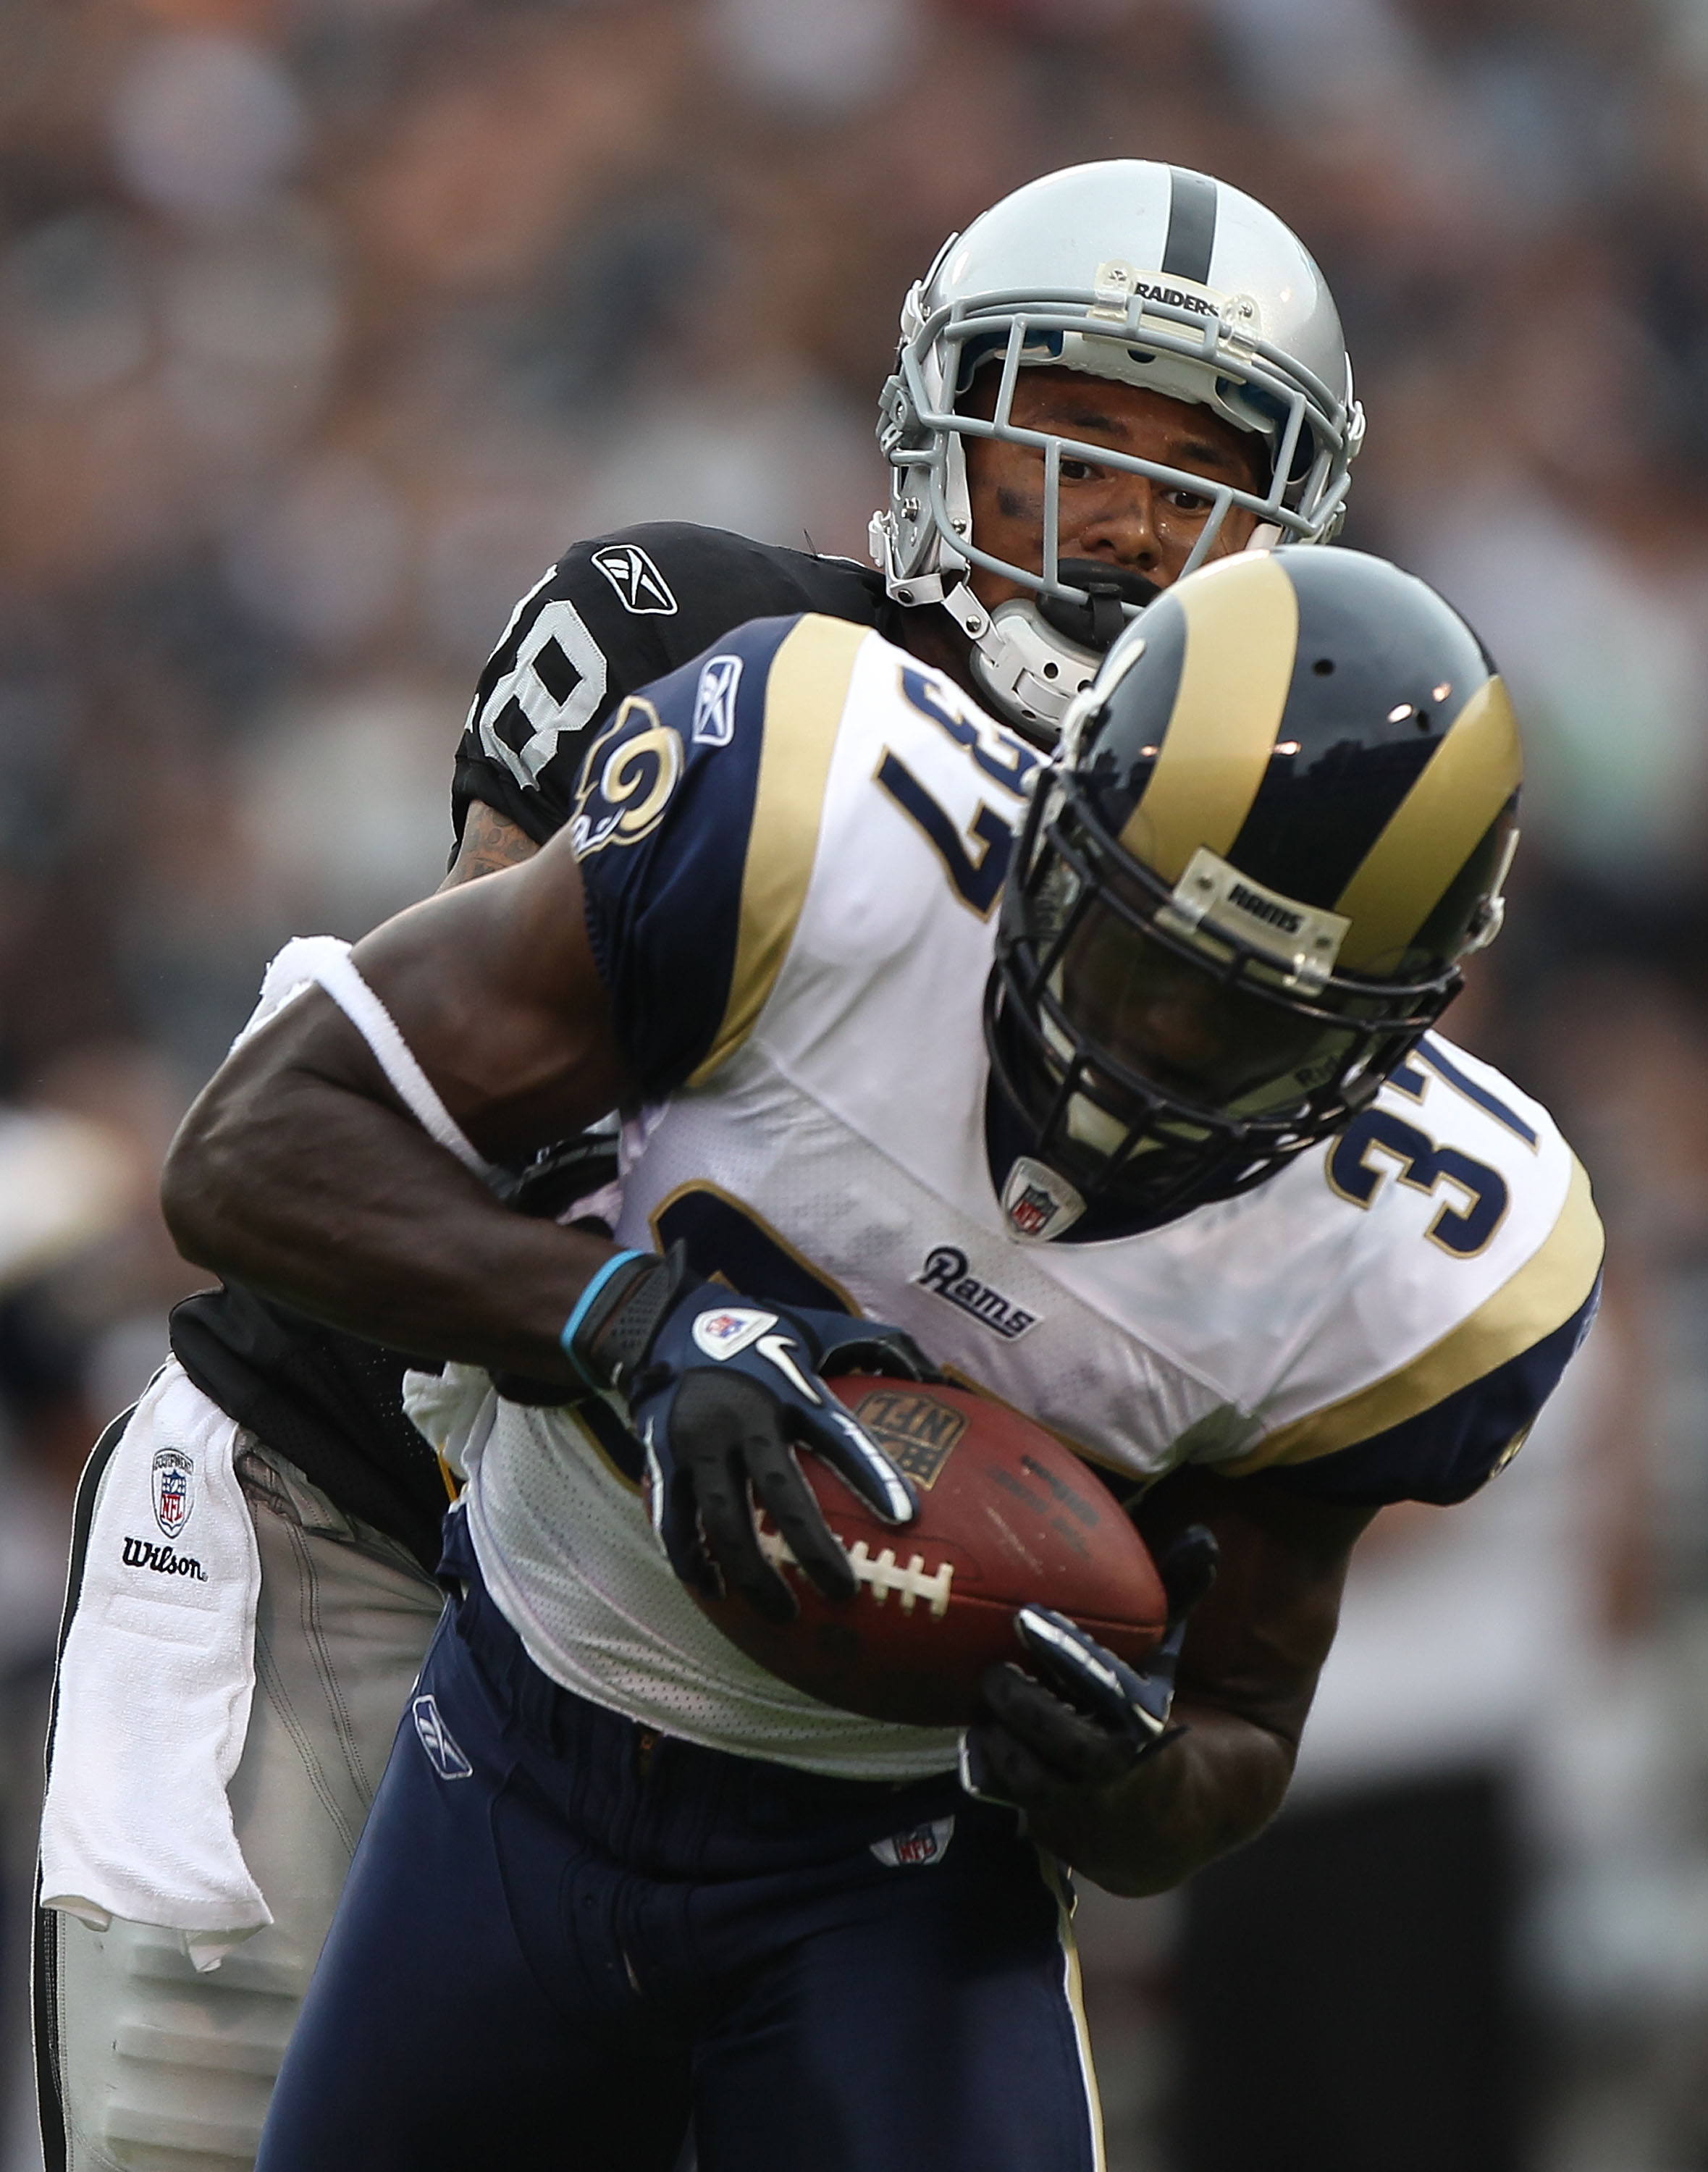 NFL: St. Louis Rams at Oakland Raiders